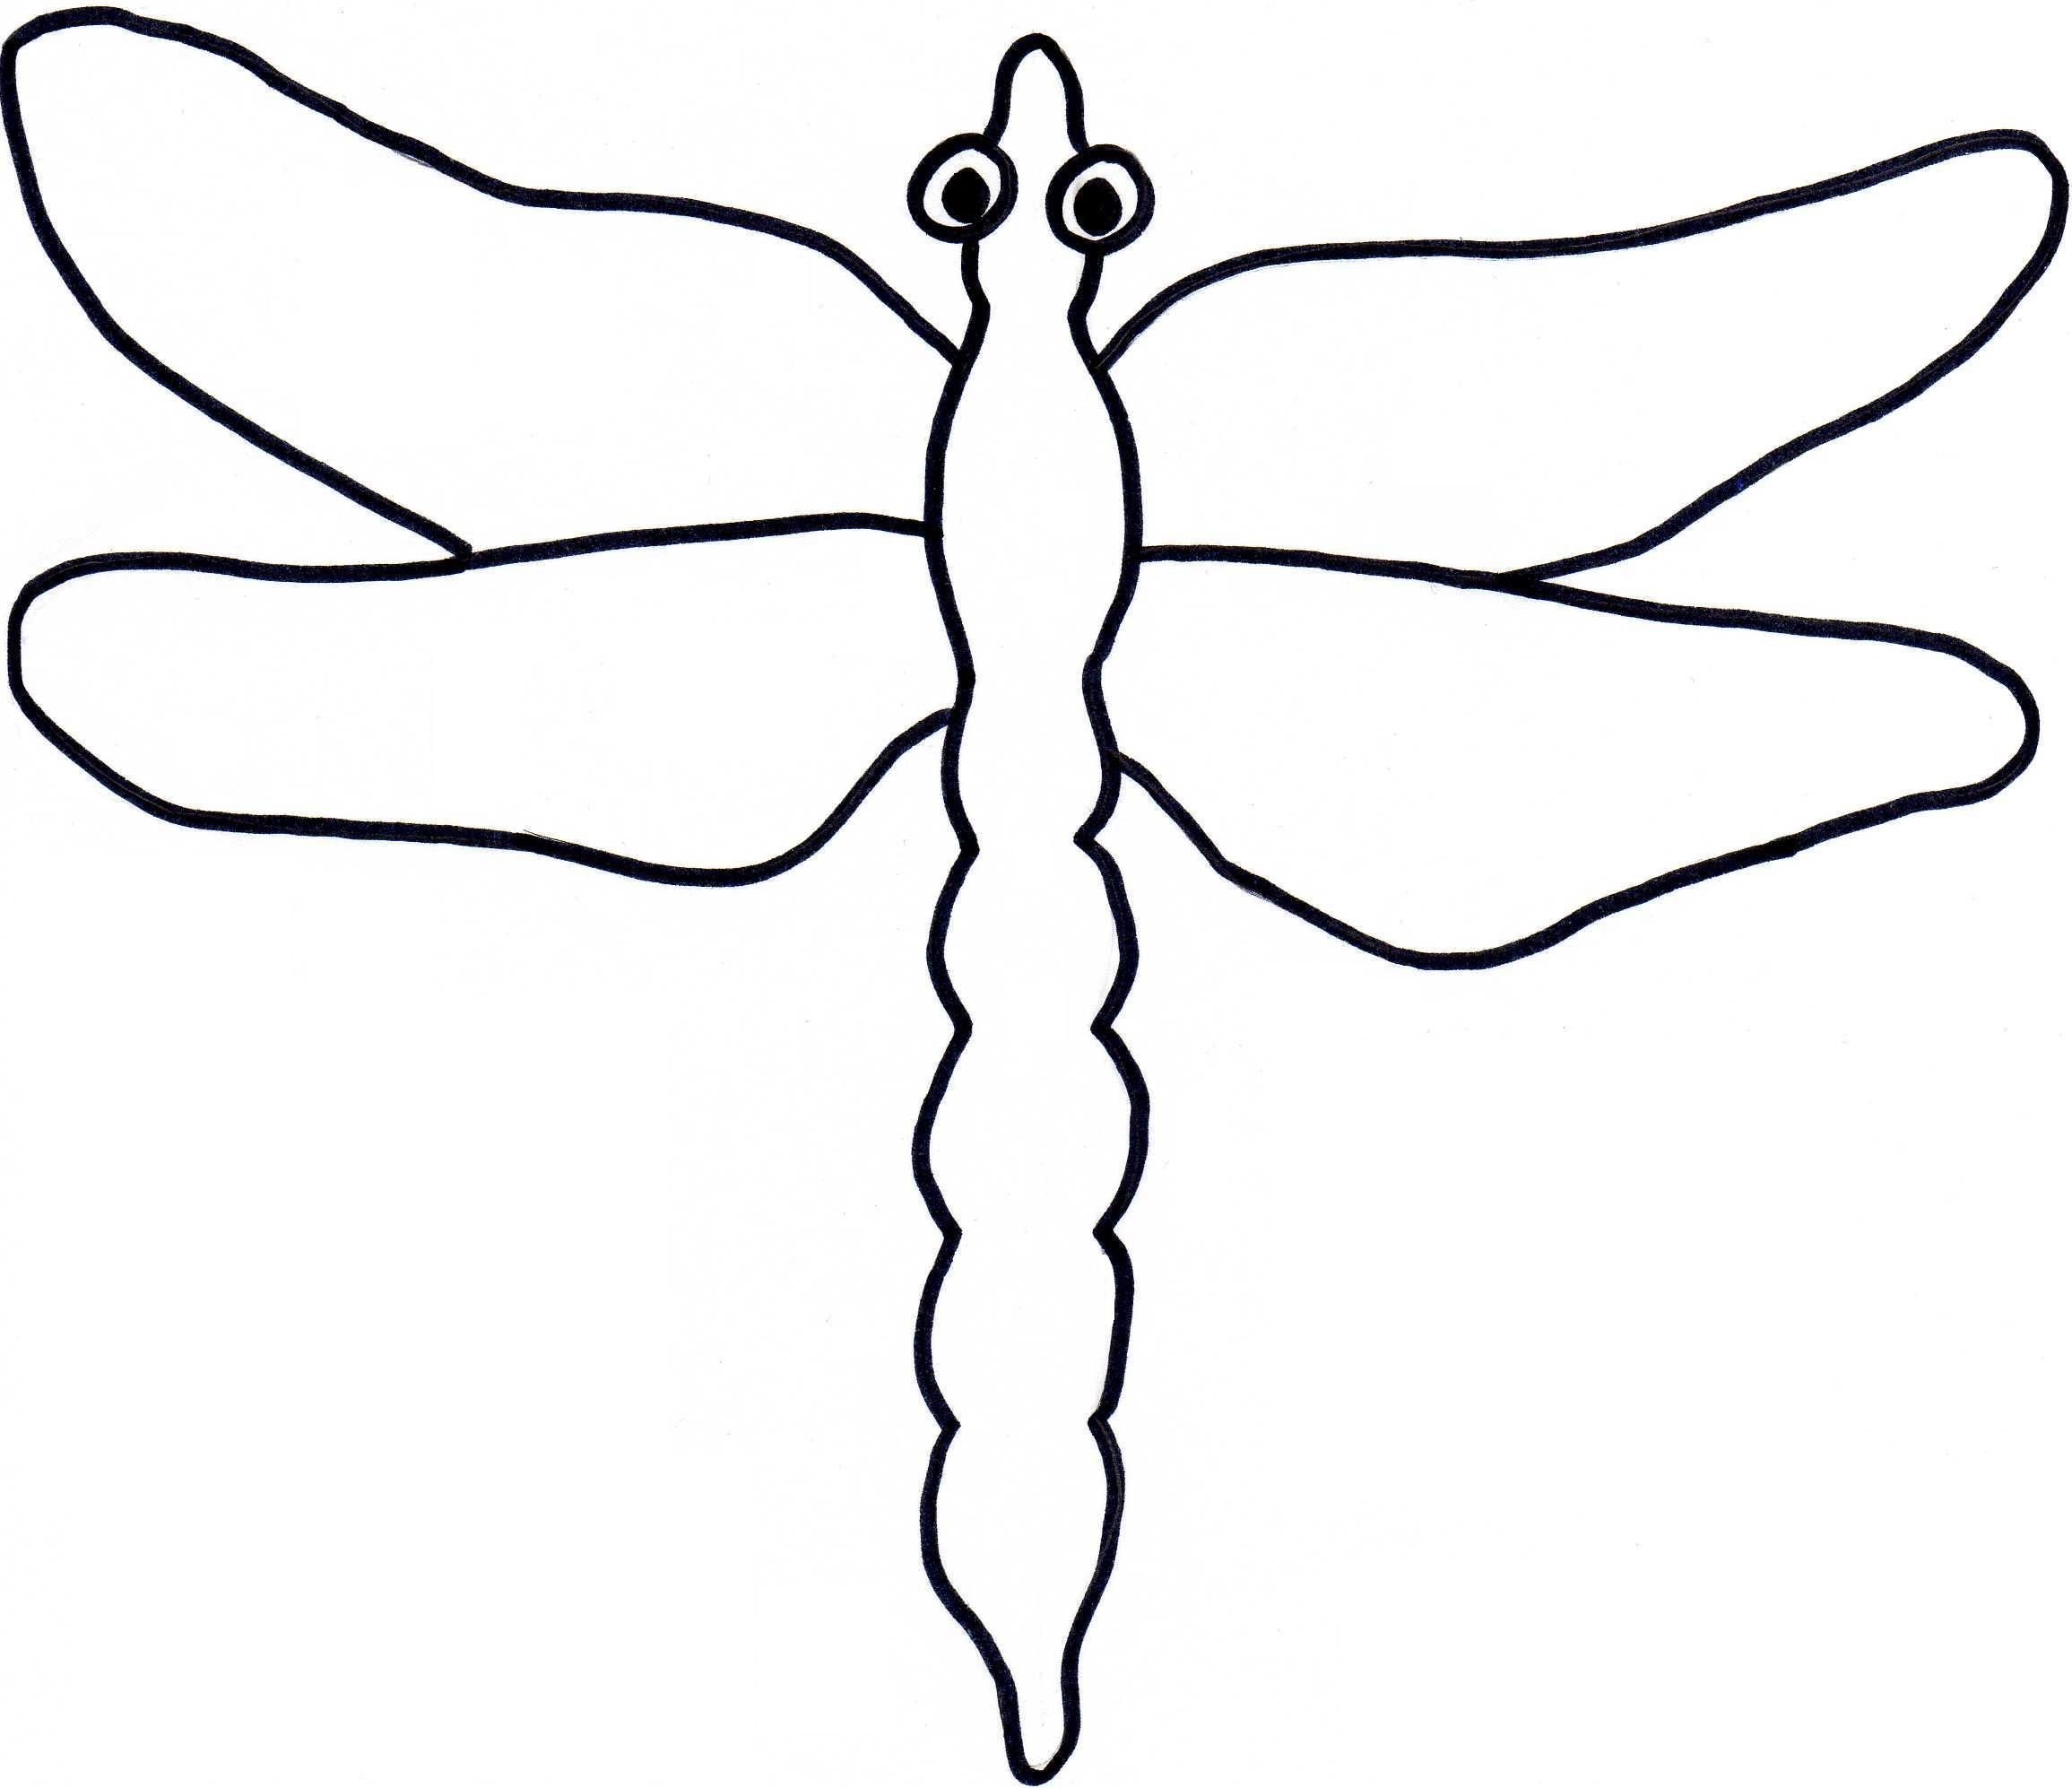 dragonfly-outlines-free-download-on-clipartmag